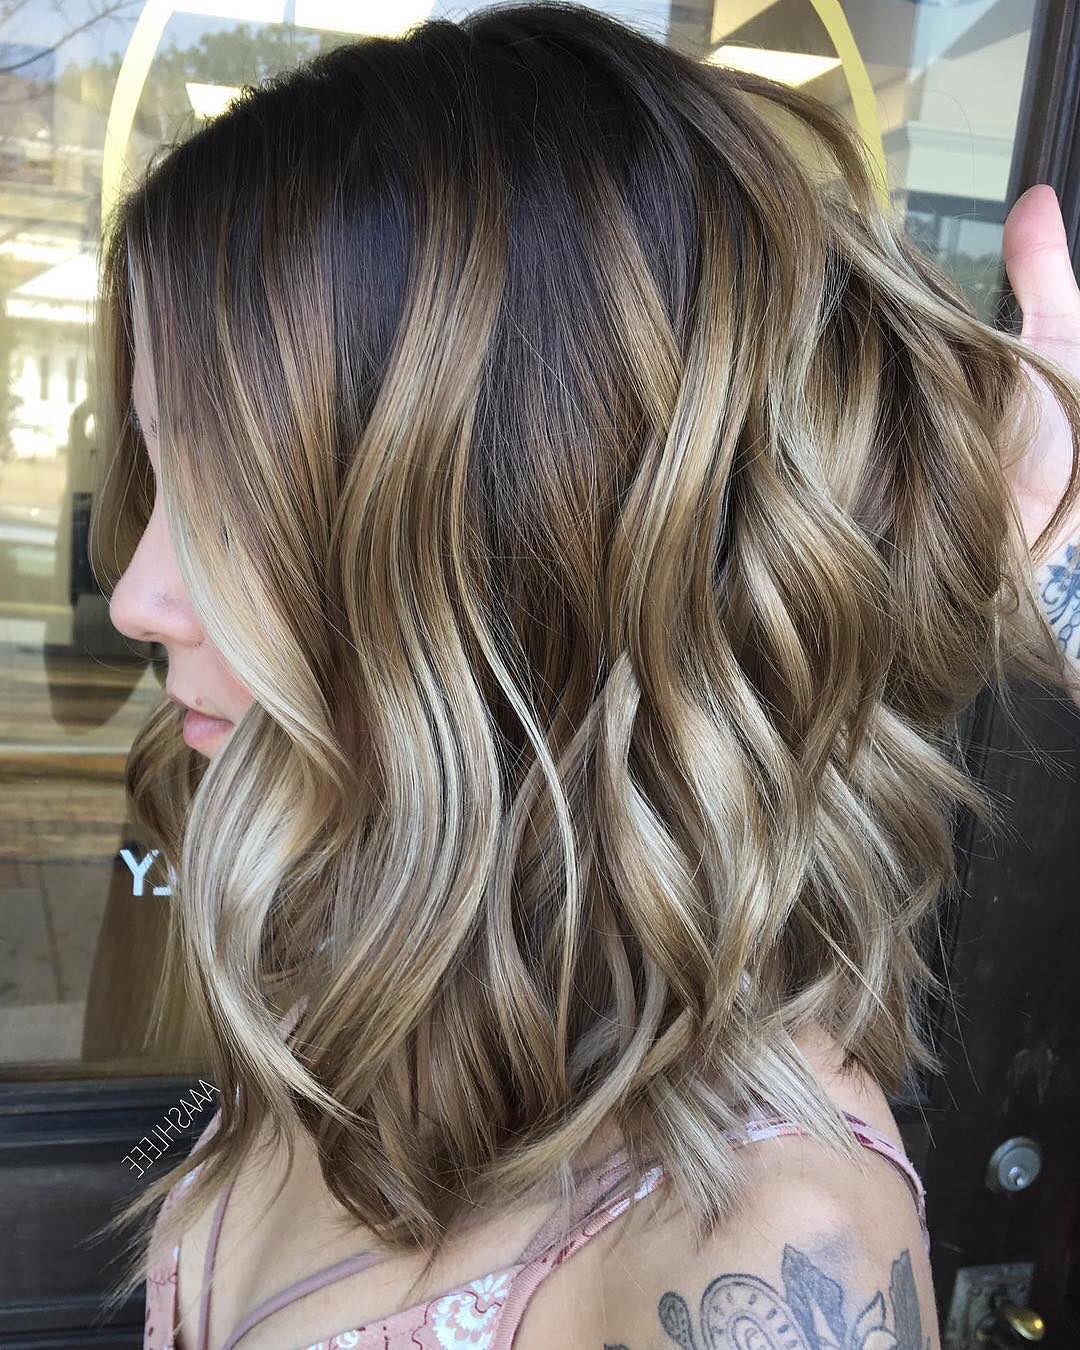 Pretty Balayage Ombre Hair Styles for Shoulder Length Hair, Medium ...